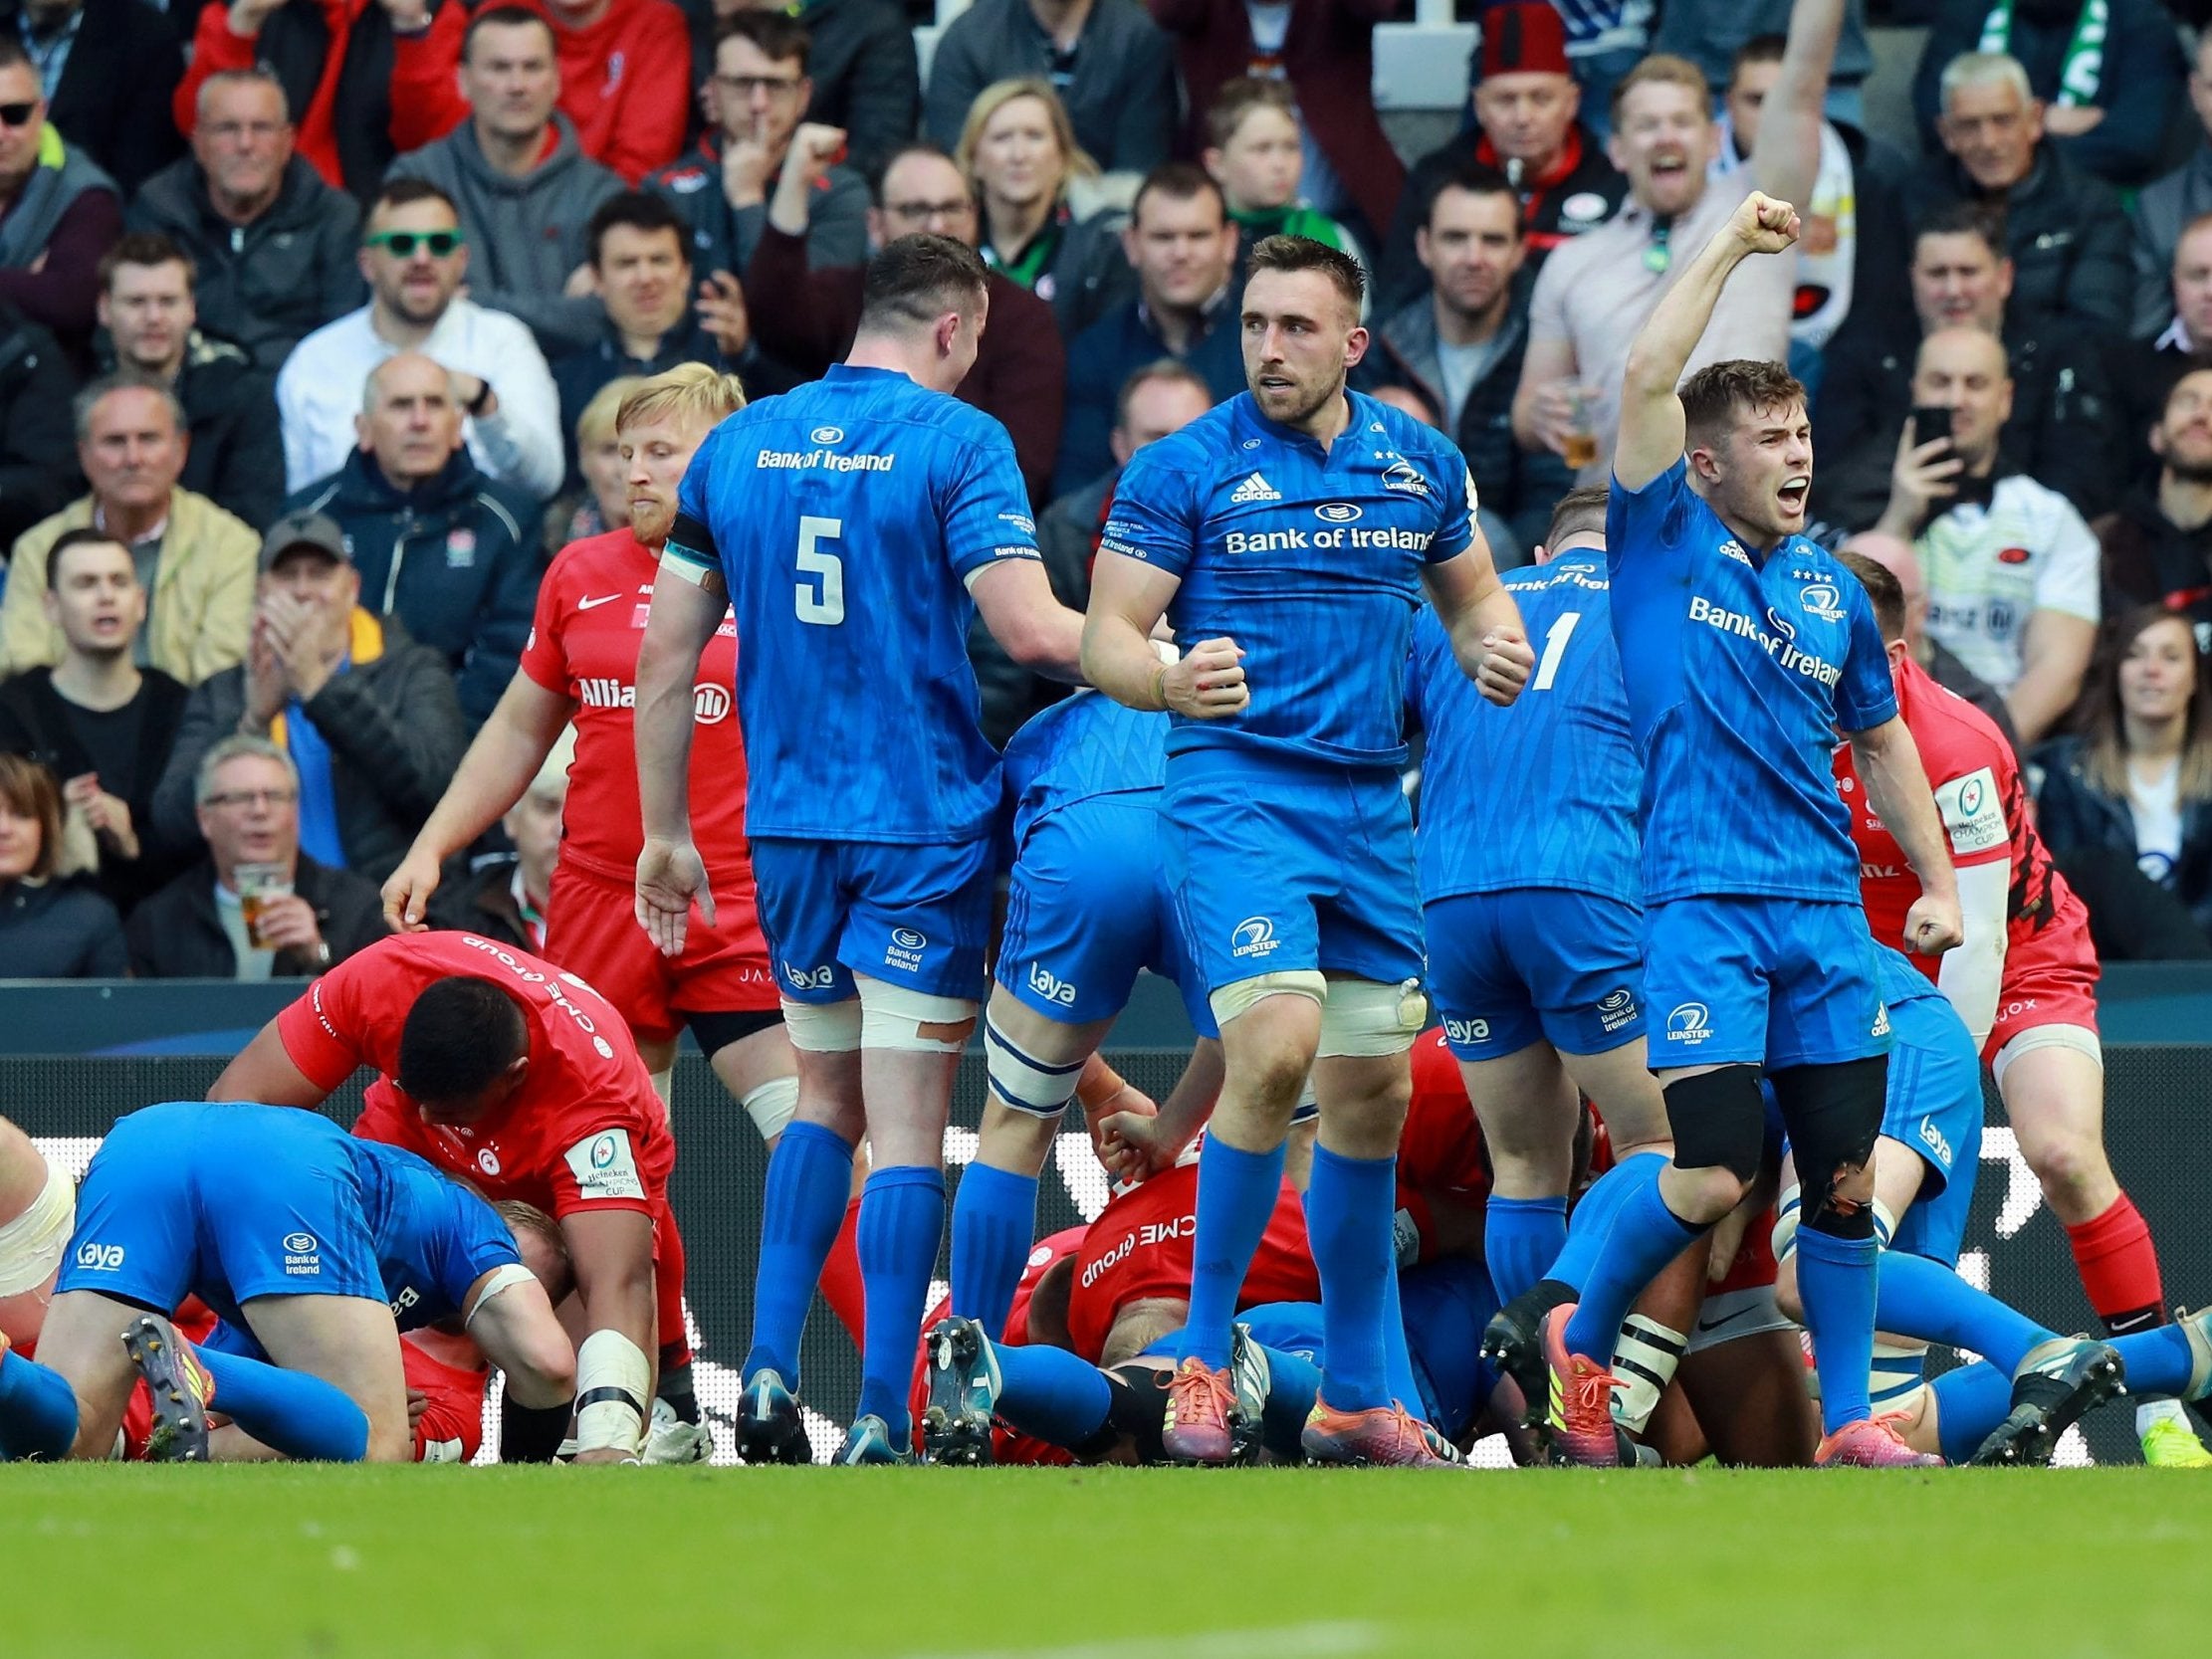 Leinster celebrate after Tadhg Furlong's try against Saracens